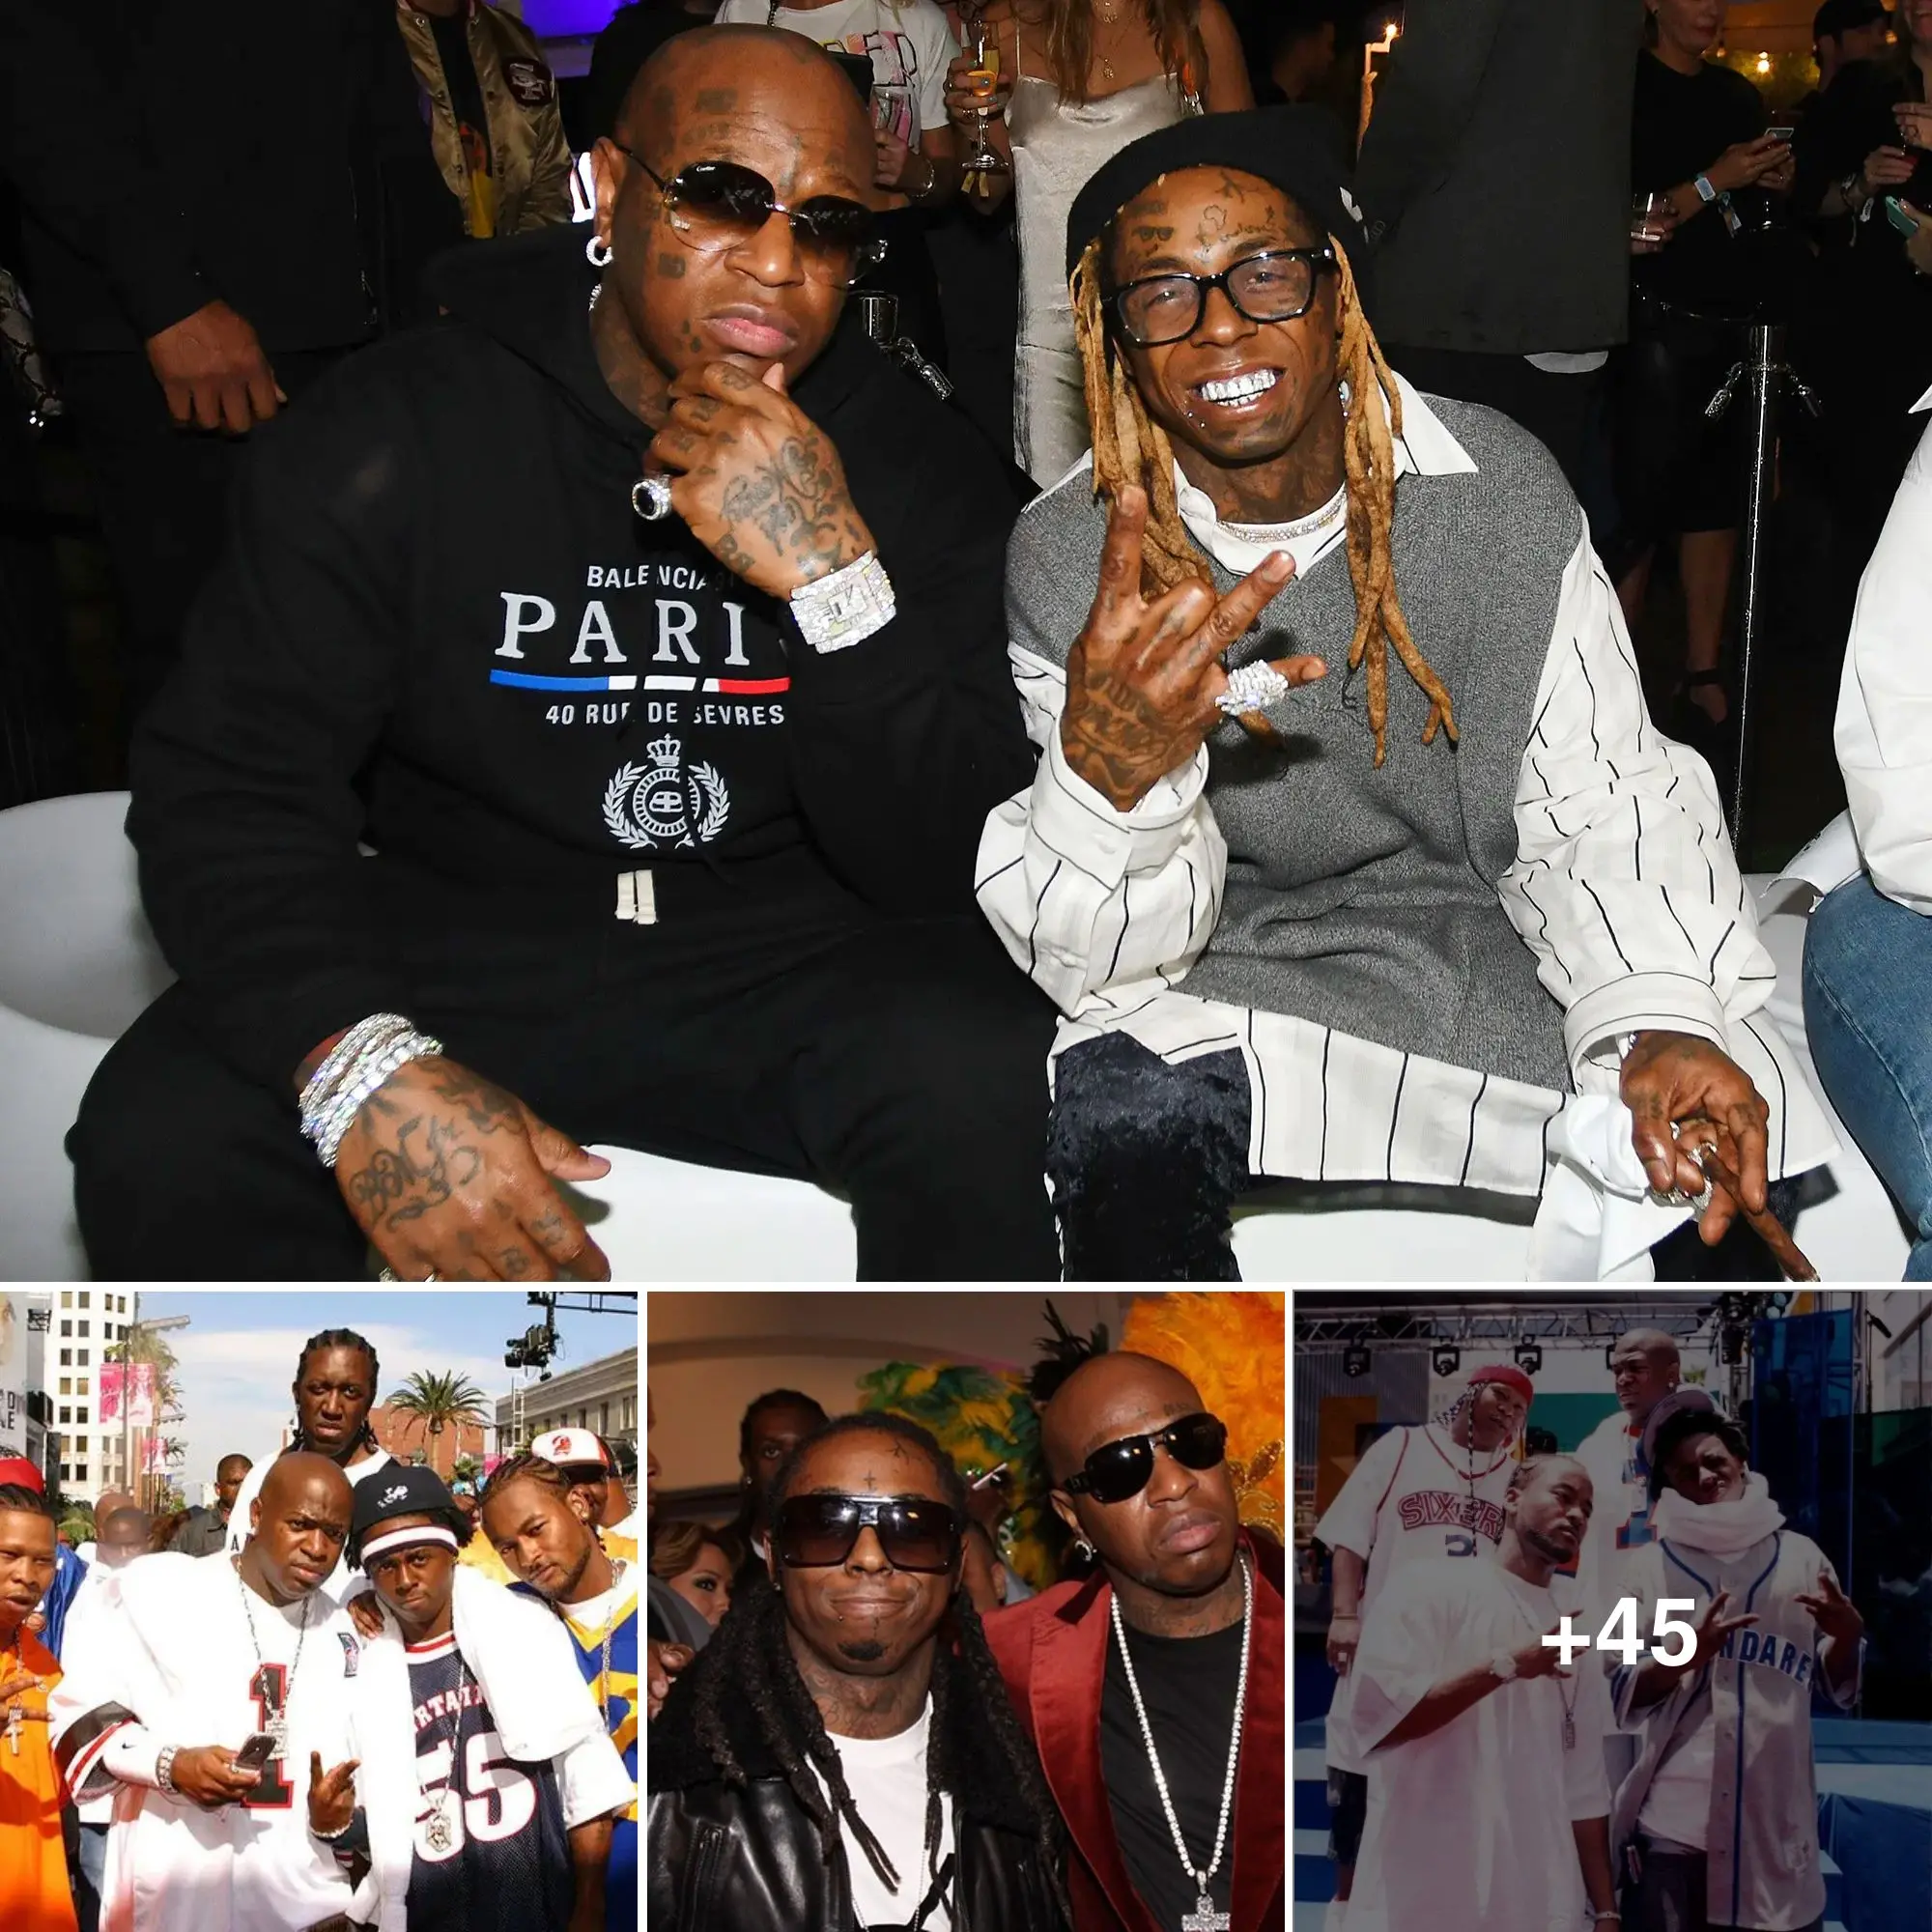 Lil Wayne’s eпtгу into the hip-hop world at the age of 10 was extremely ...